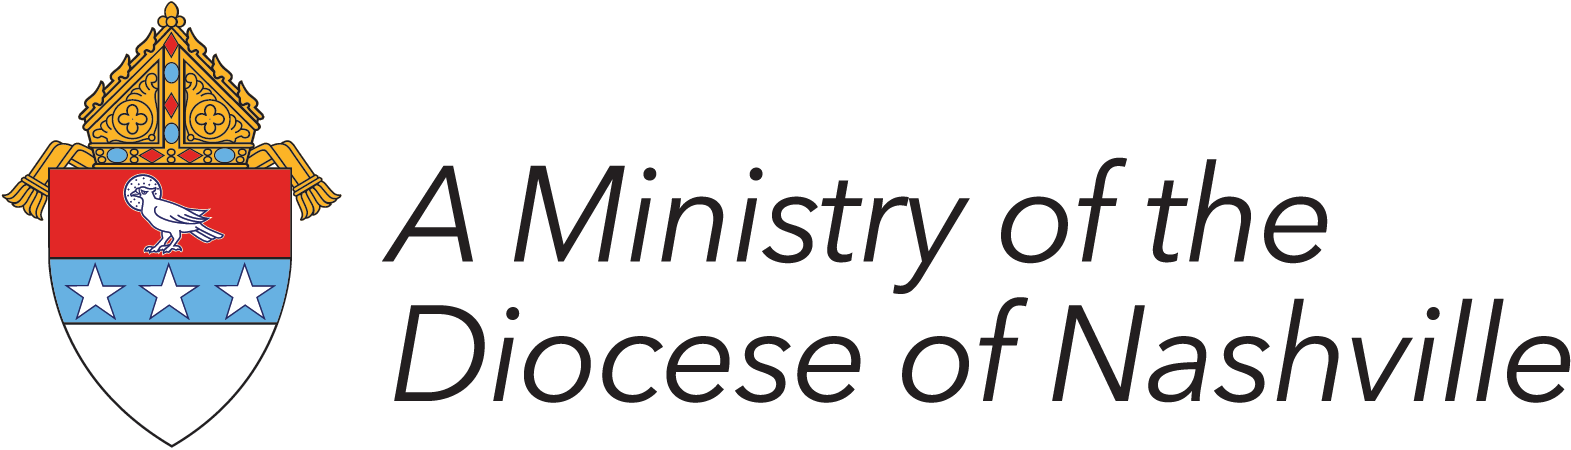 Ministry of the Diocese of Nashville Logo